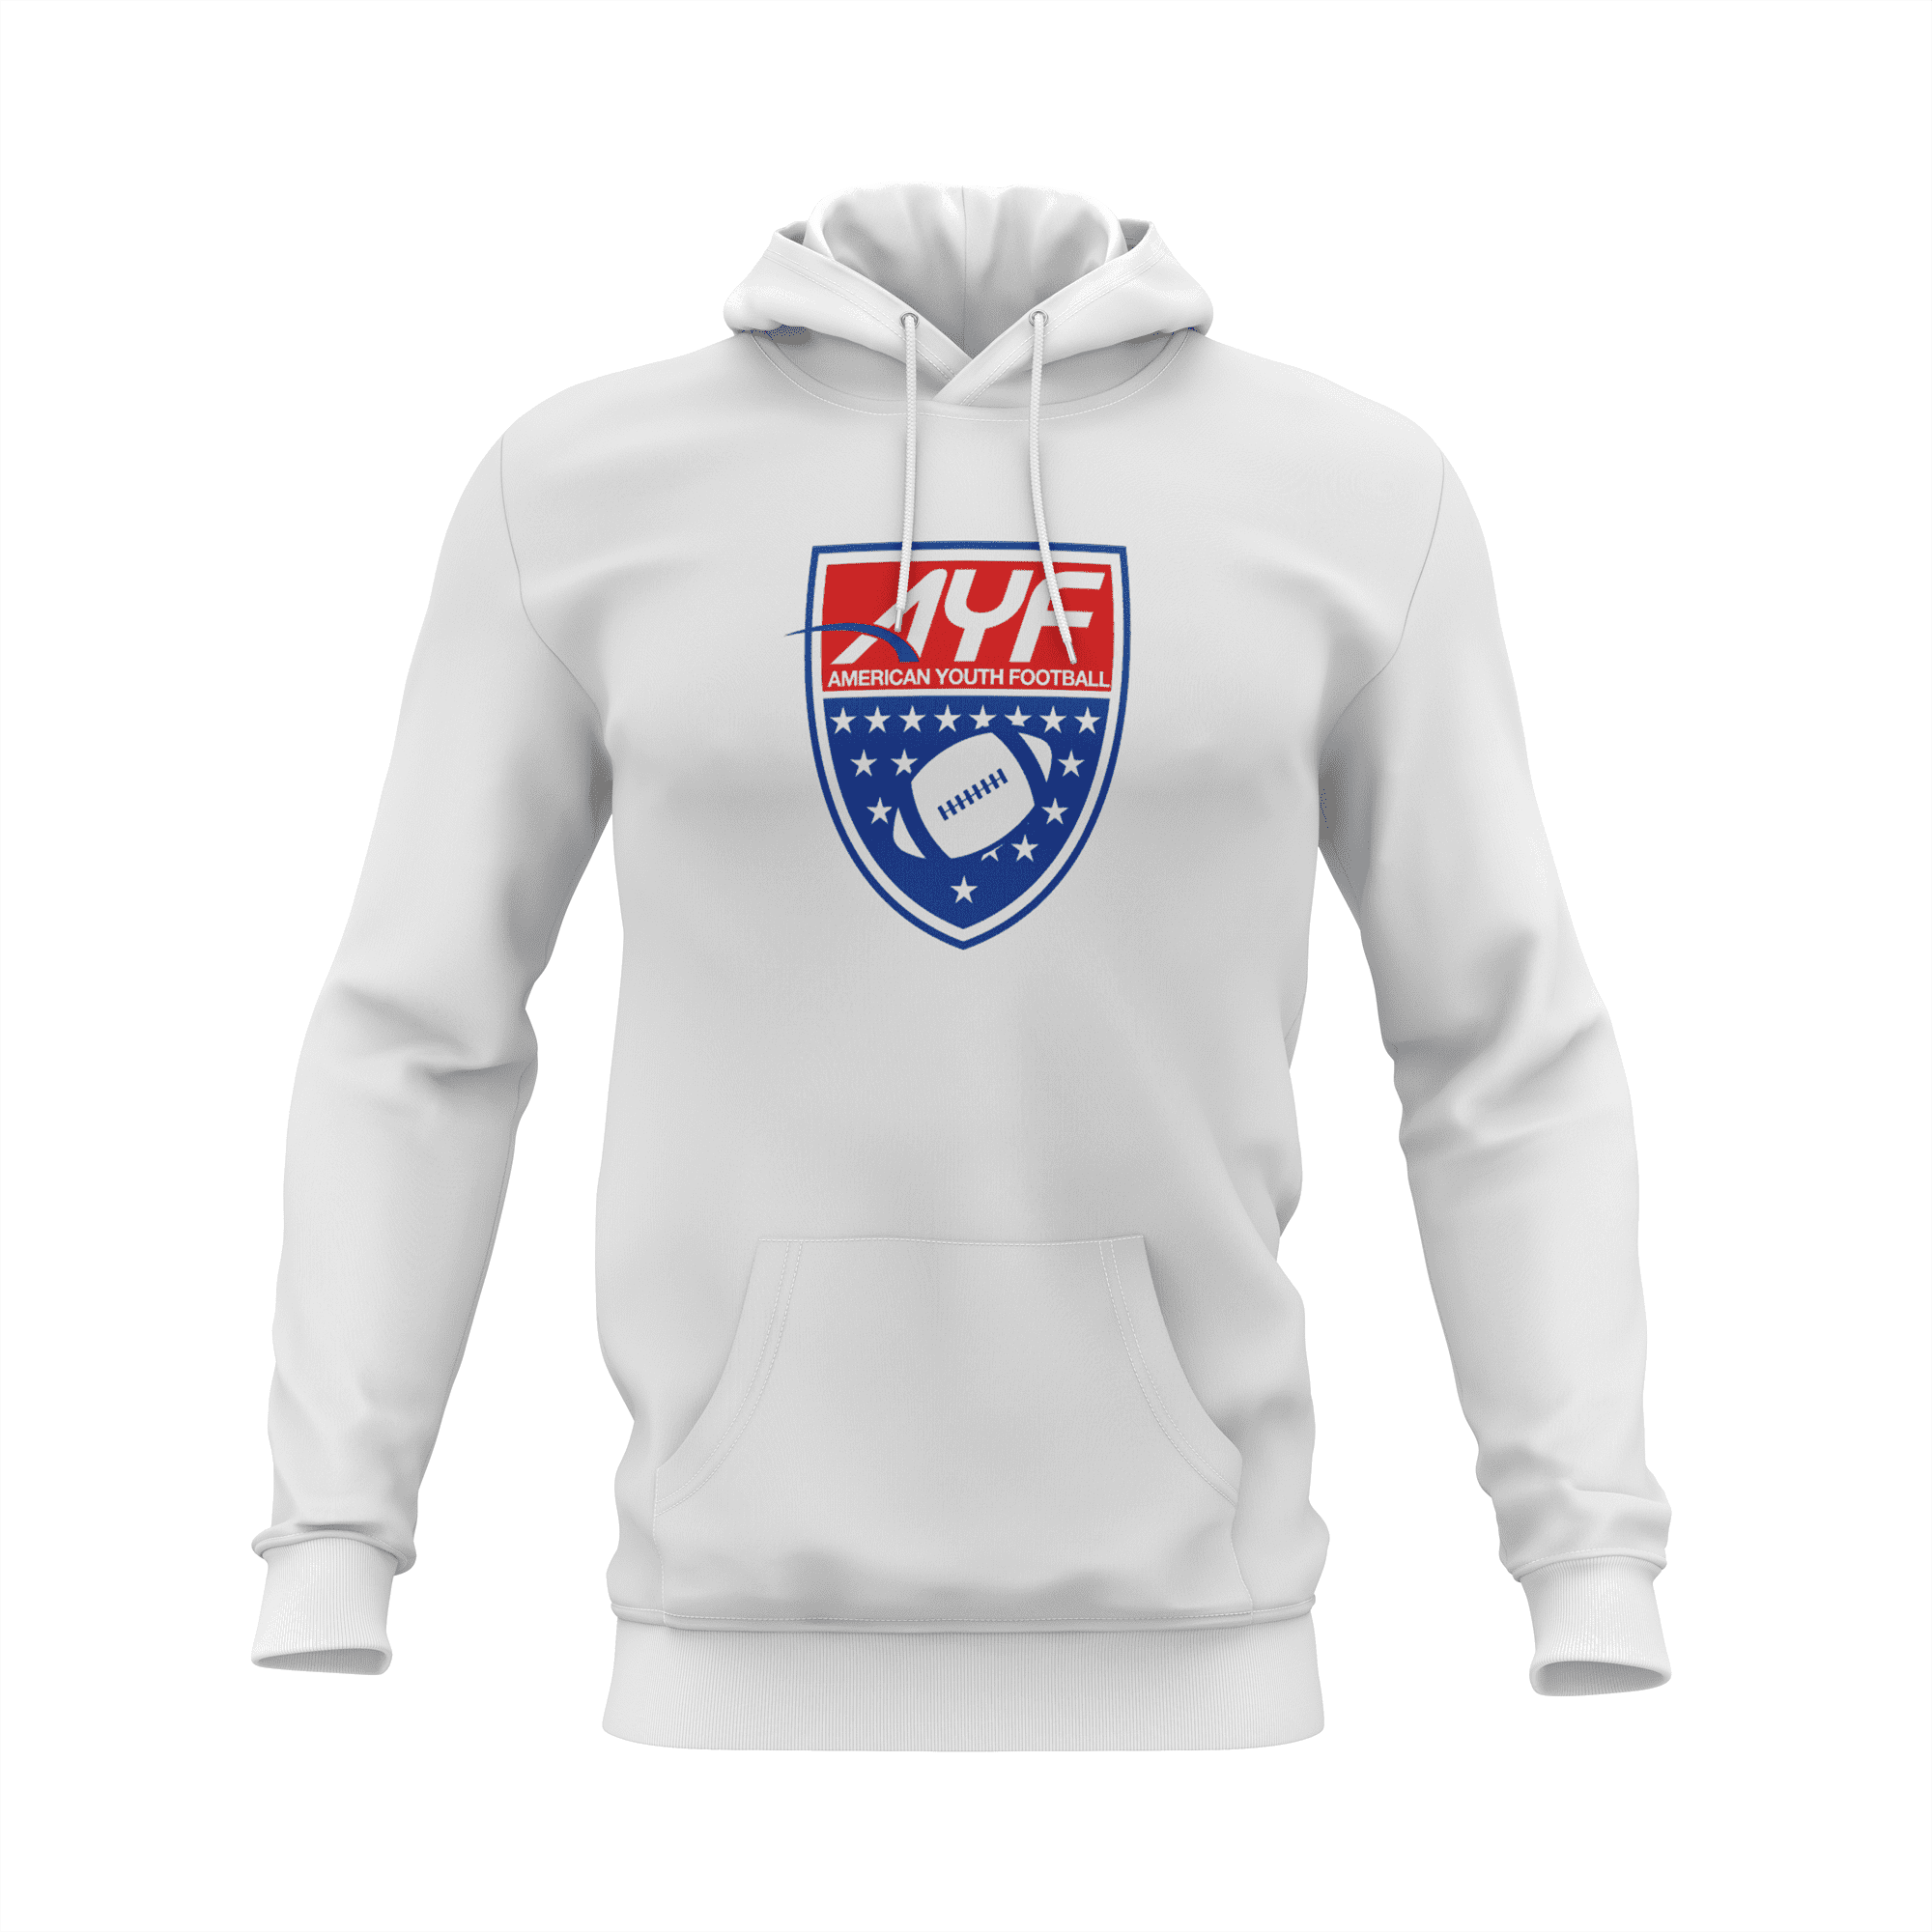 AYF Full Dye Sublimated Hoodie (6 Colors)